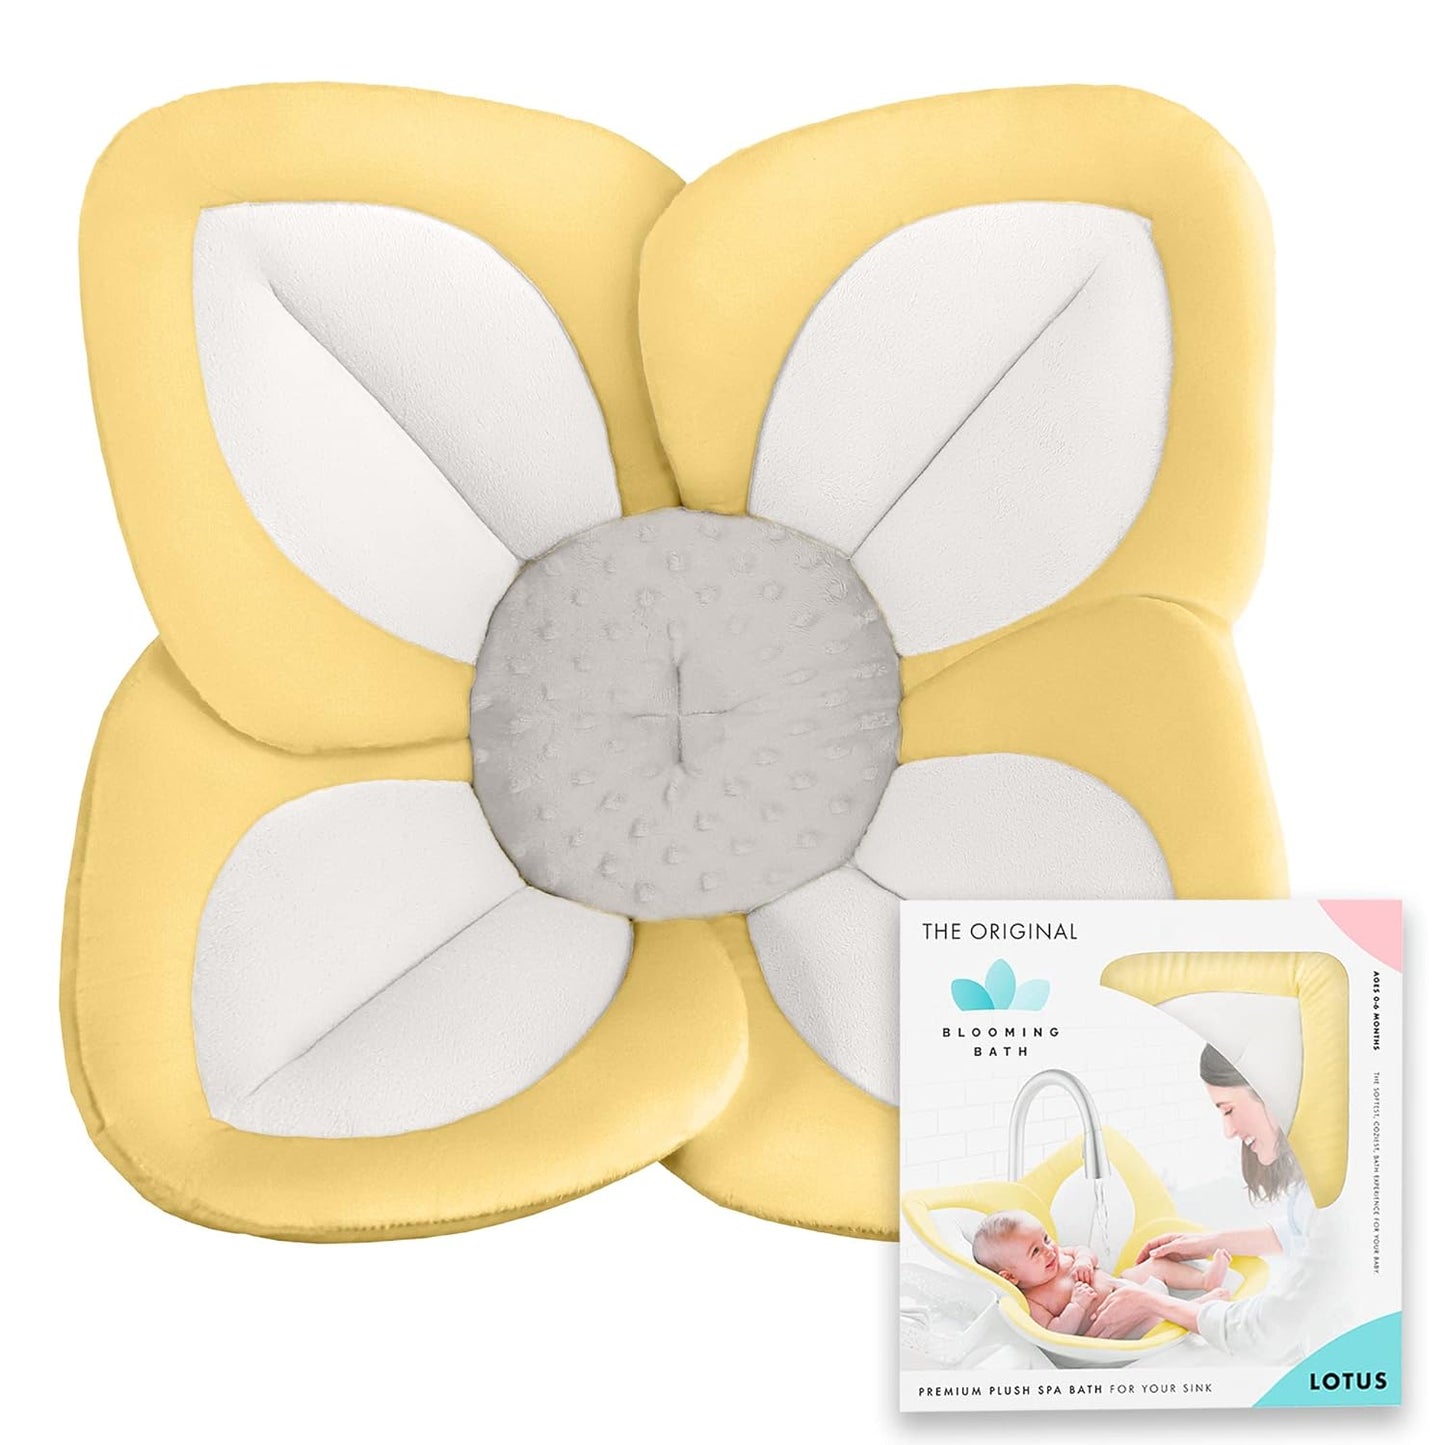 Blooming Bath Baby Bath Seat - Baby Tubs for Newborn Infants to Toddler 0 to 6 Months and Up - Baby Essentials Must Haves - The Original Washer-Safe Flower Seat (Lotus, Gray/Dark Gray)